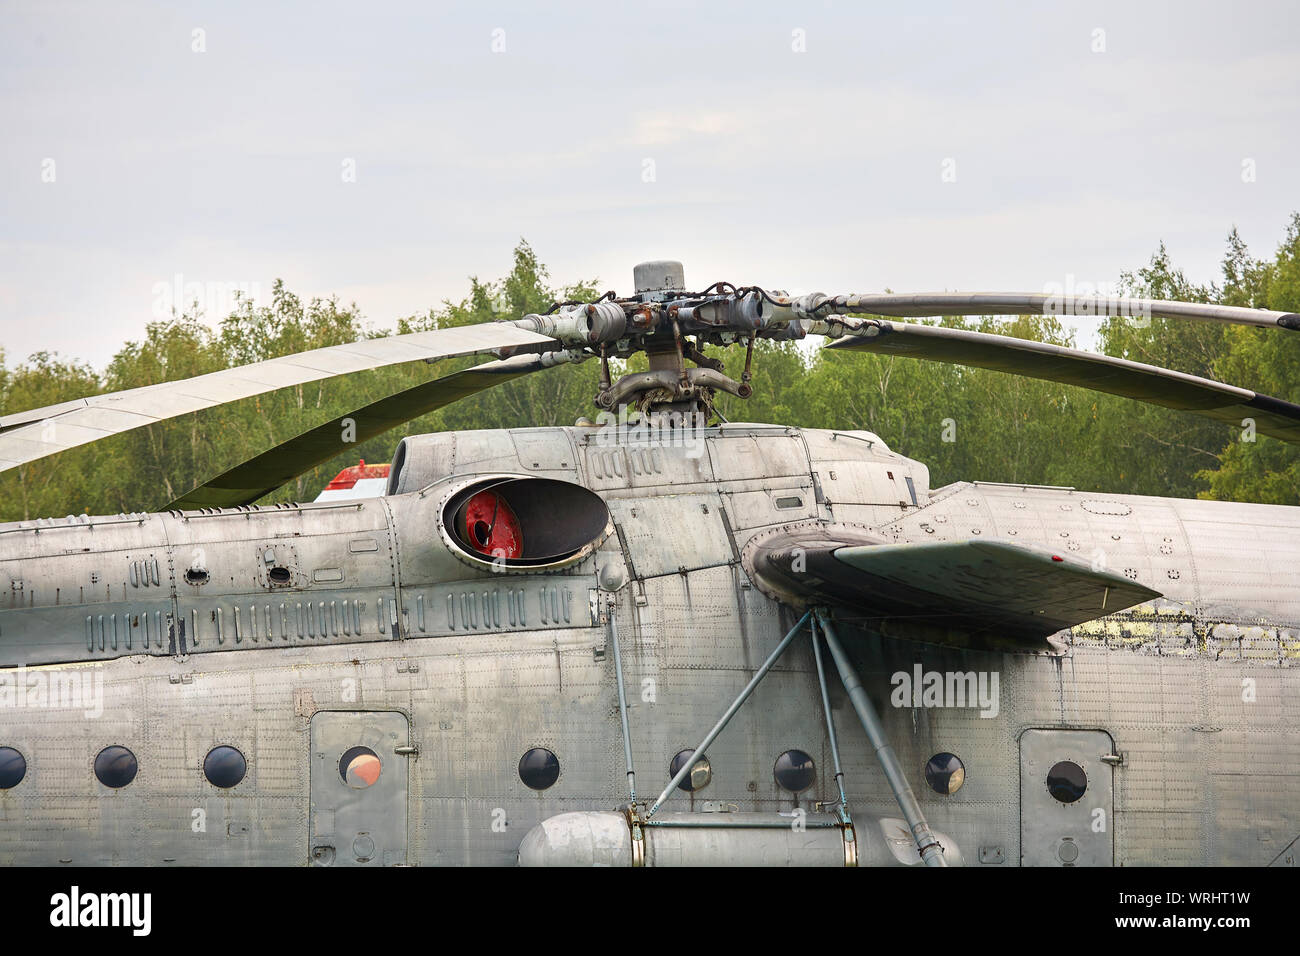 An old military helicopter painted gray closeup. Stock Photo